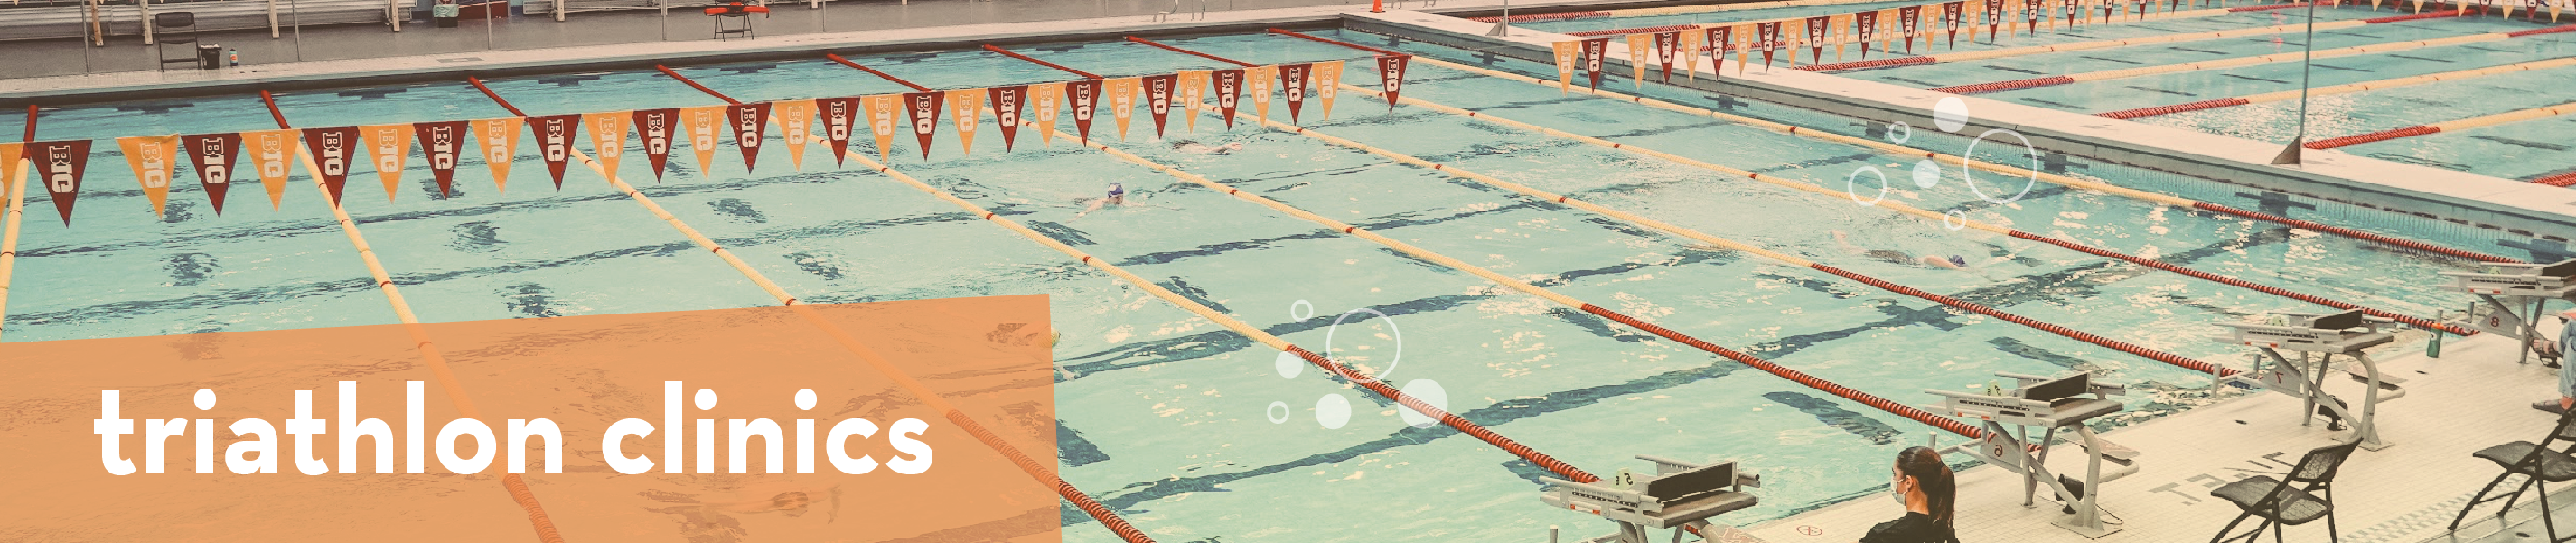 picture of the pool with the text "triathlon clinics" with an orange text box 